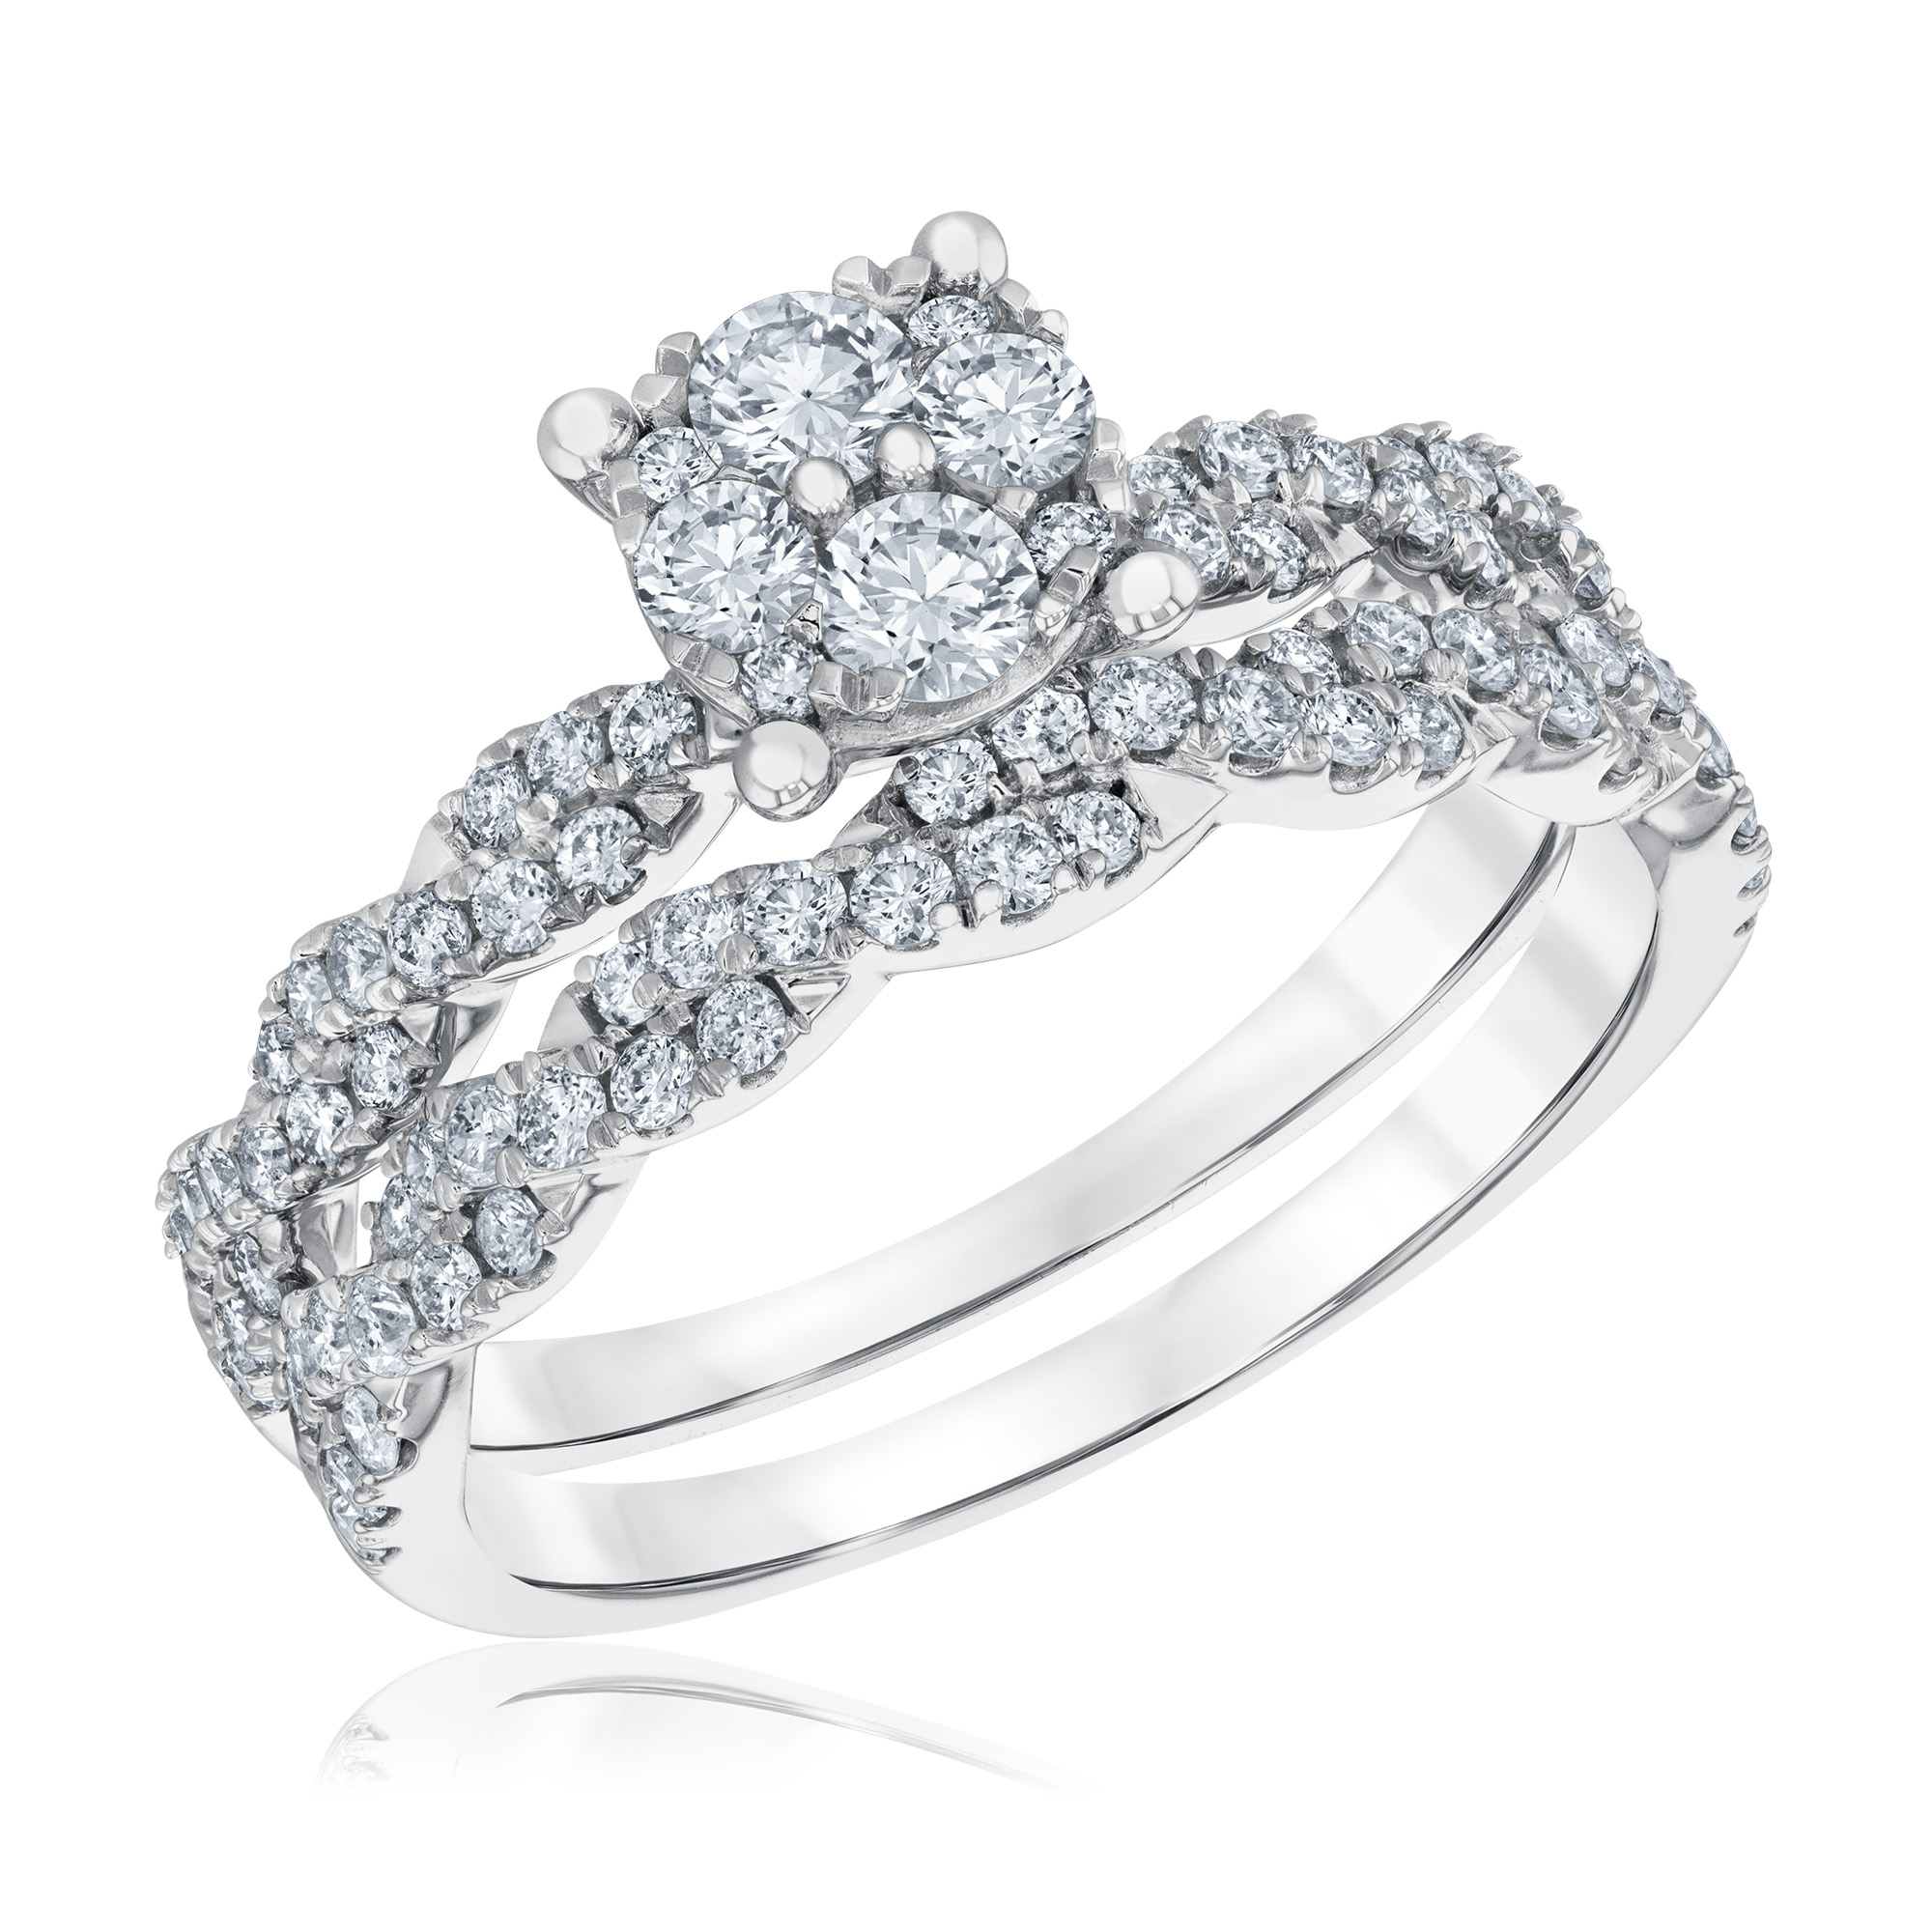 1ctw Diamond Cluster White Gold Engagement Ring and Wedding Band Set - Harmony Collection